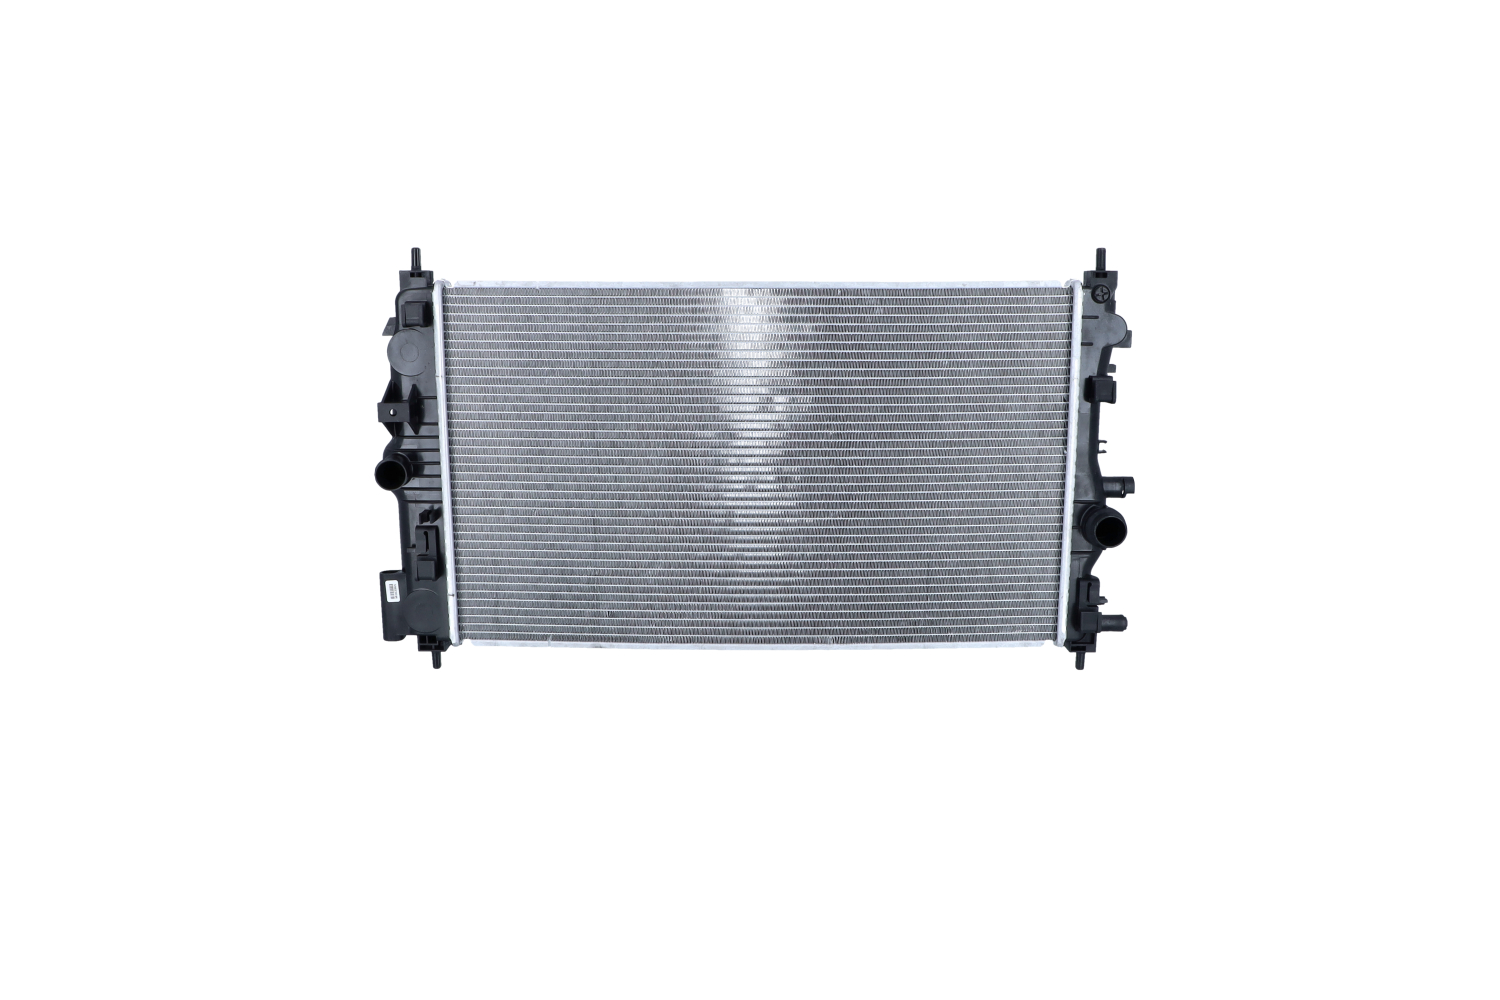 NRF 53129 Engine radiator Aluminium, 680 x 382 x 28 mm, with mounting parts, Brazed cooling fins